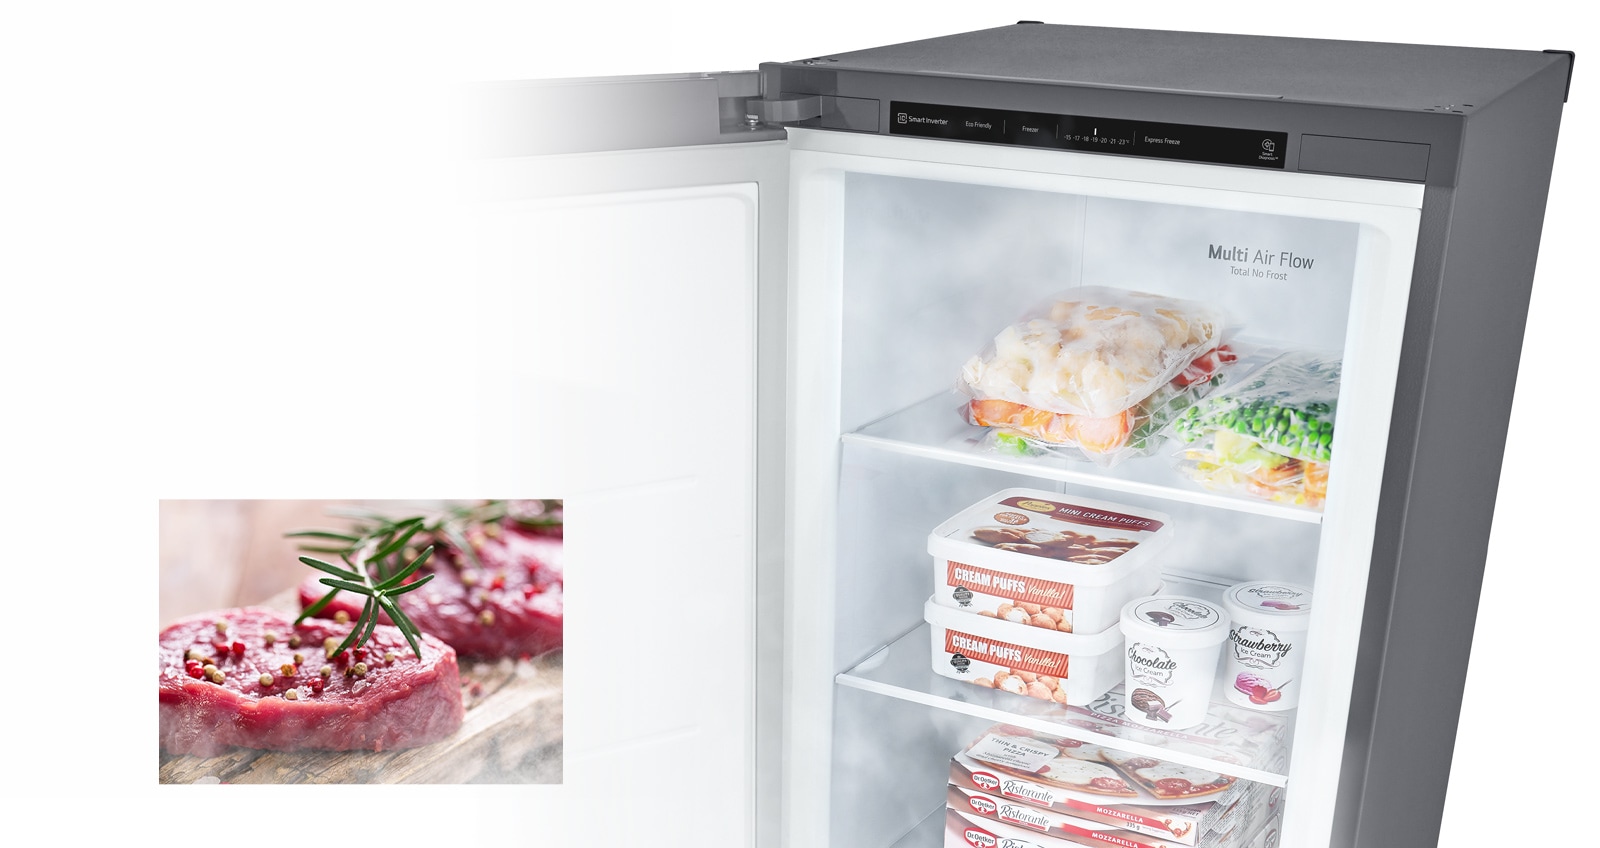 One image shows an open freezer filled with produce and cold air blowing throughout. The second image shows uncooked raw meat that has thawed and is ready to cook.